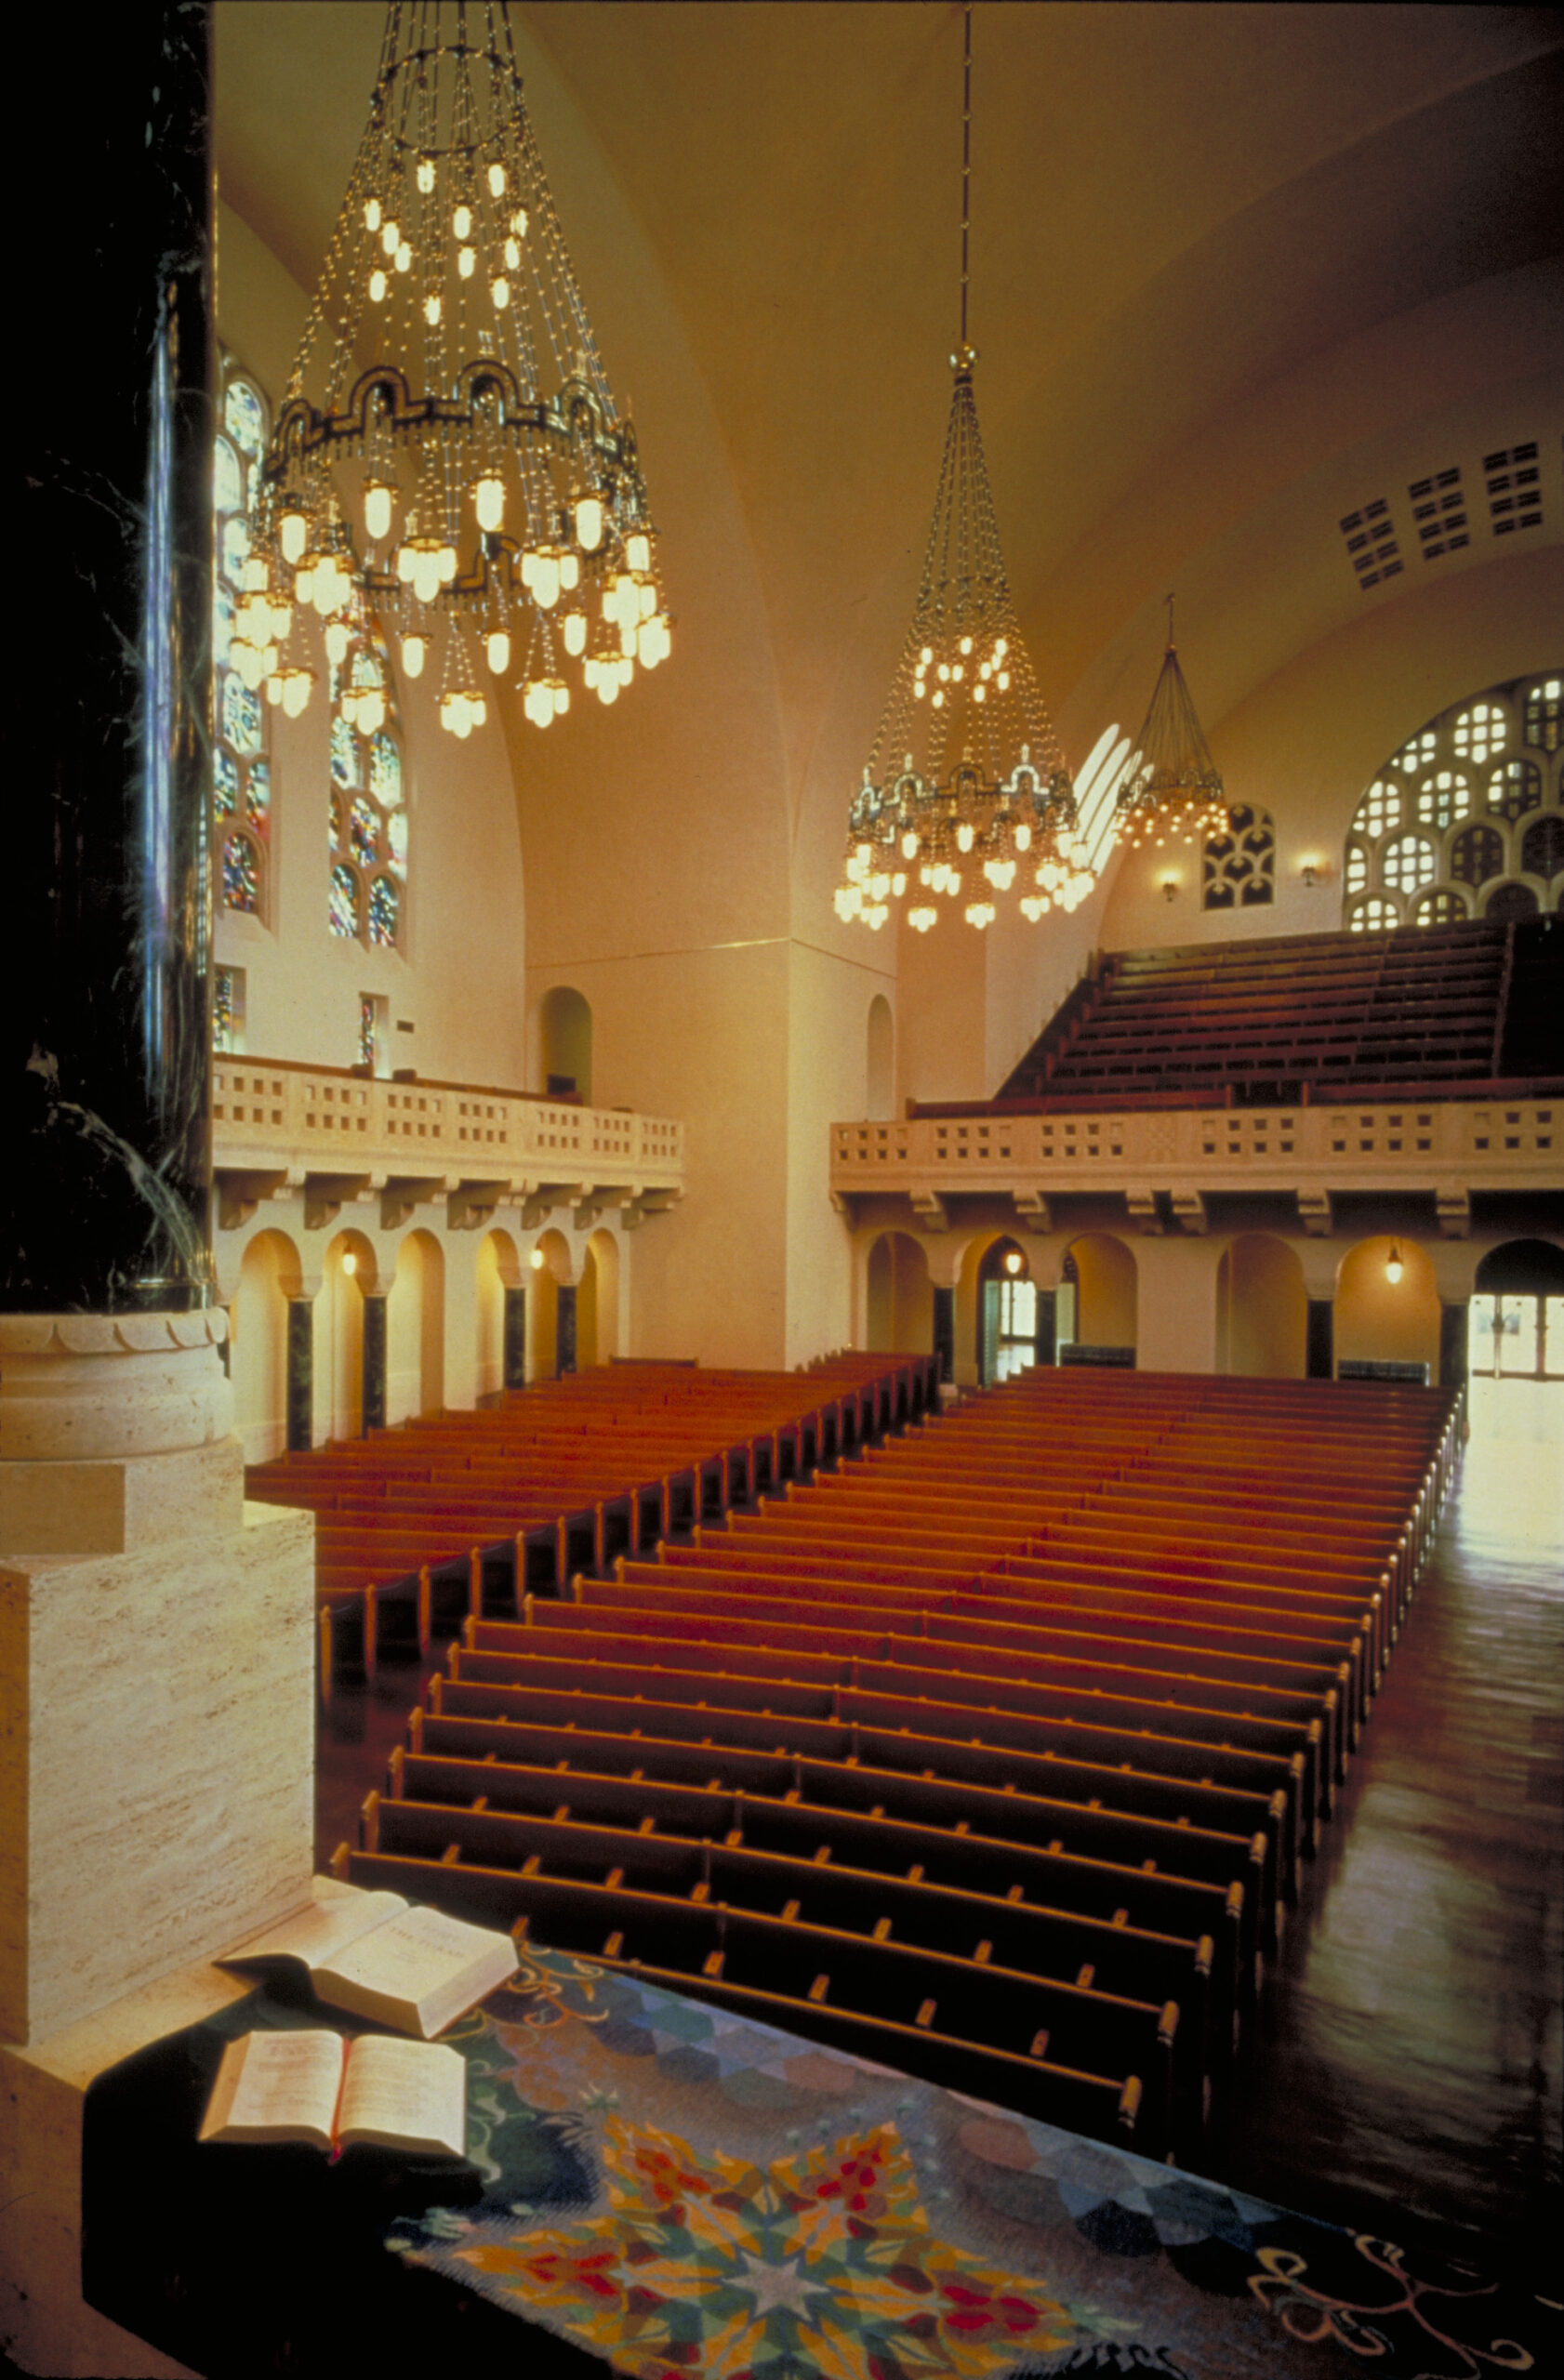 The historic chandeliers and sconces were rewired, relamped and cleaned. Temple Emanu-El, San Francisco, California © Chas McGrath